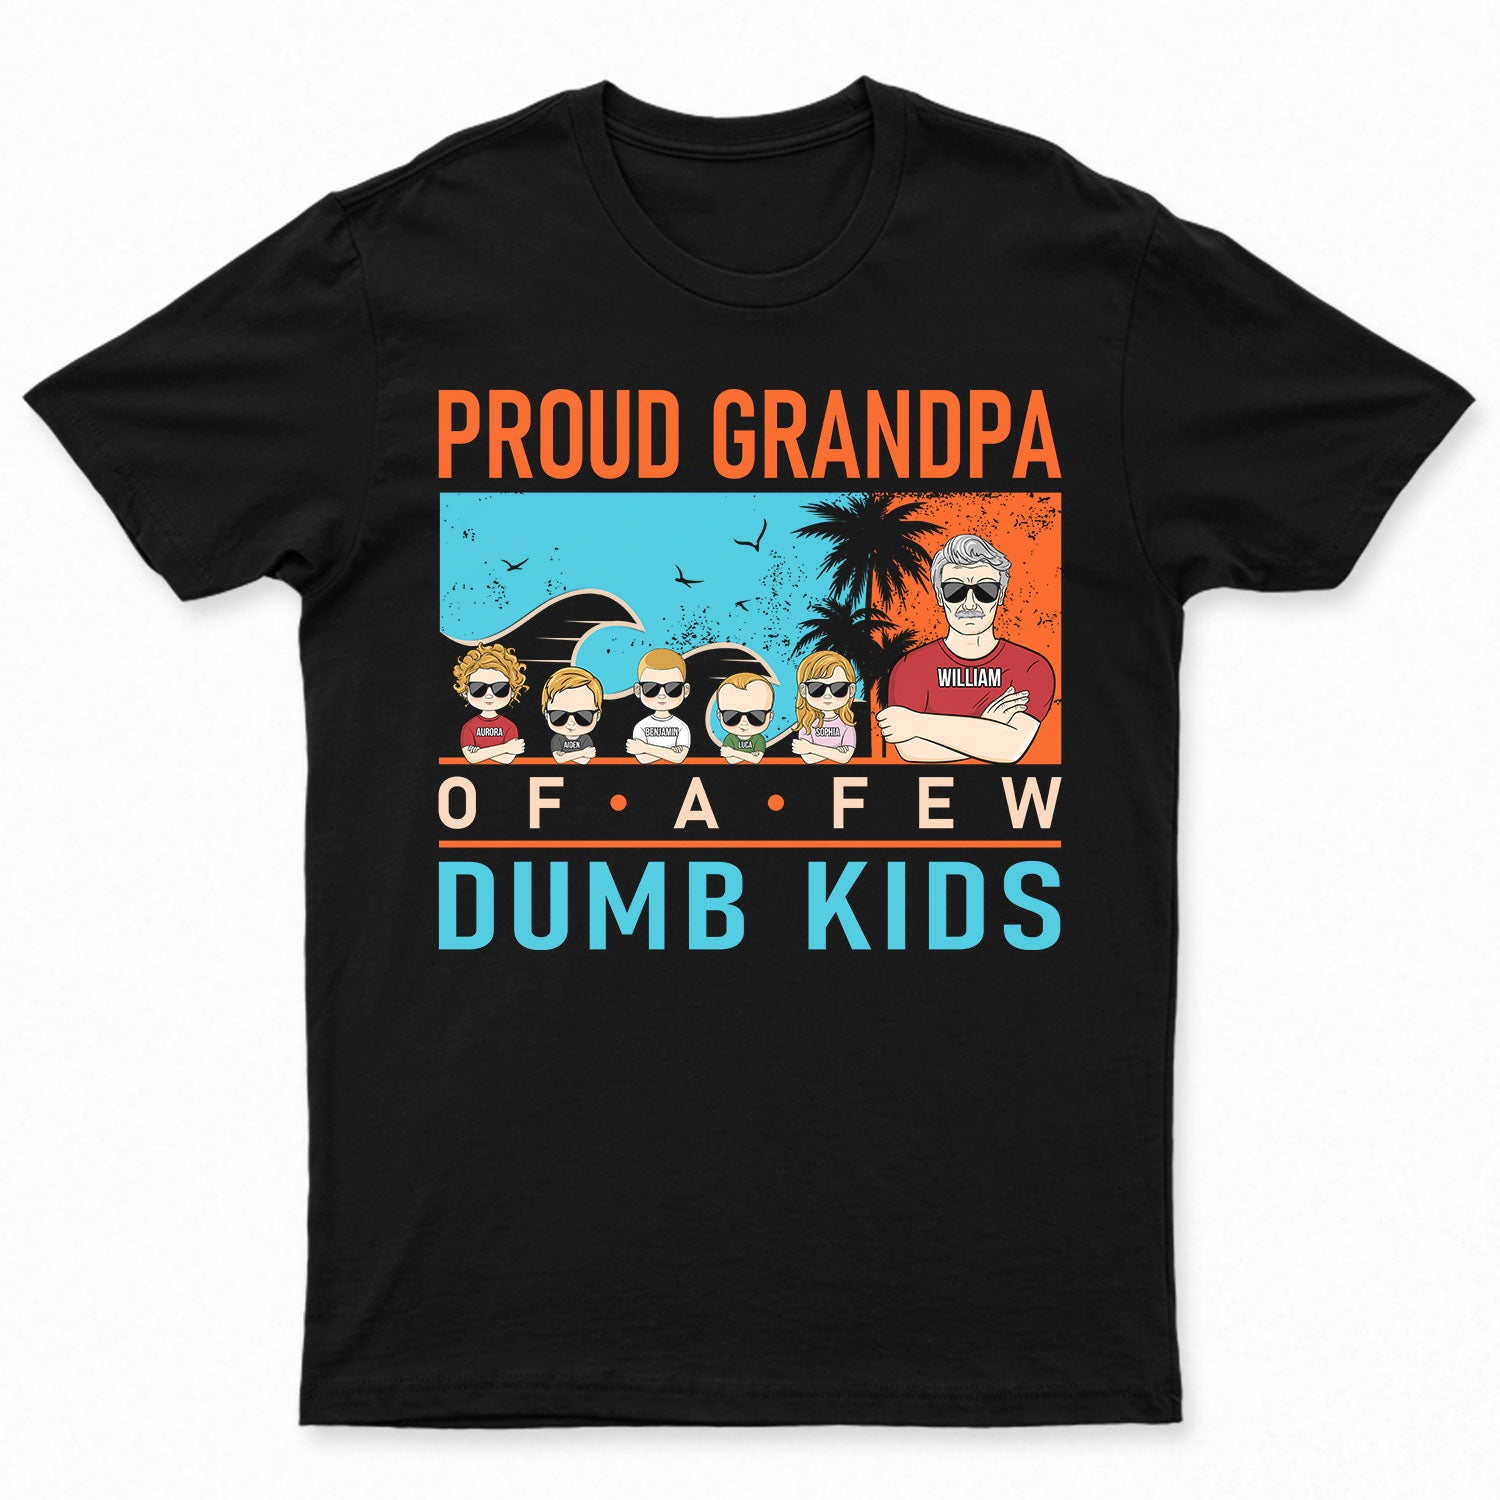 Proud Father Grandpa Of A Few Dumb Kids - Gift For Father - Personalized Custom T Shirt